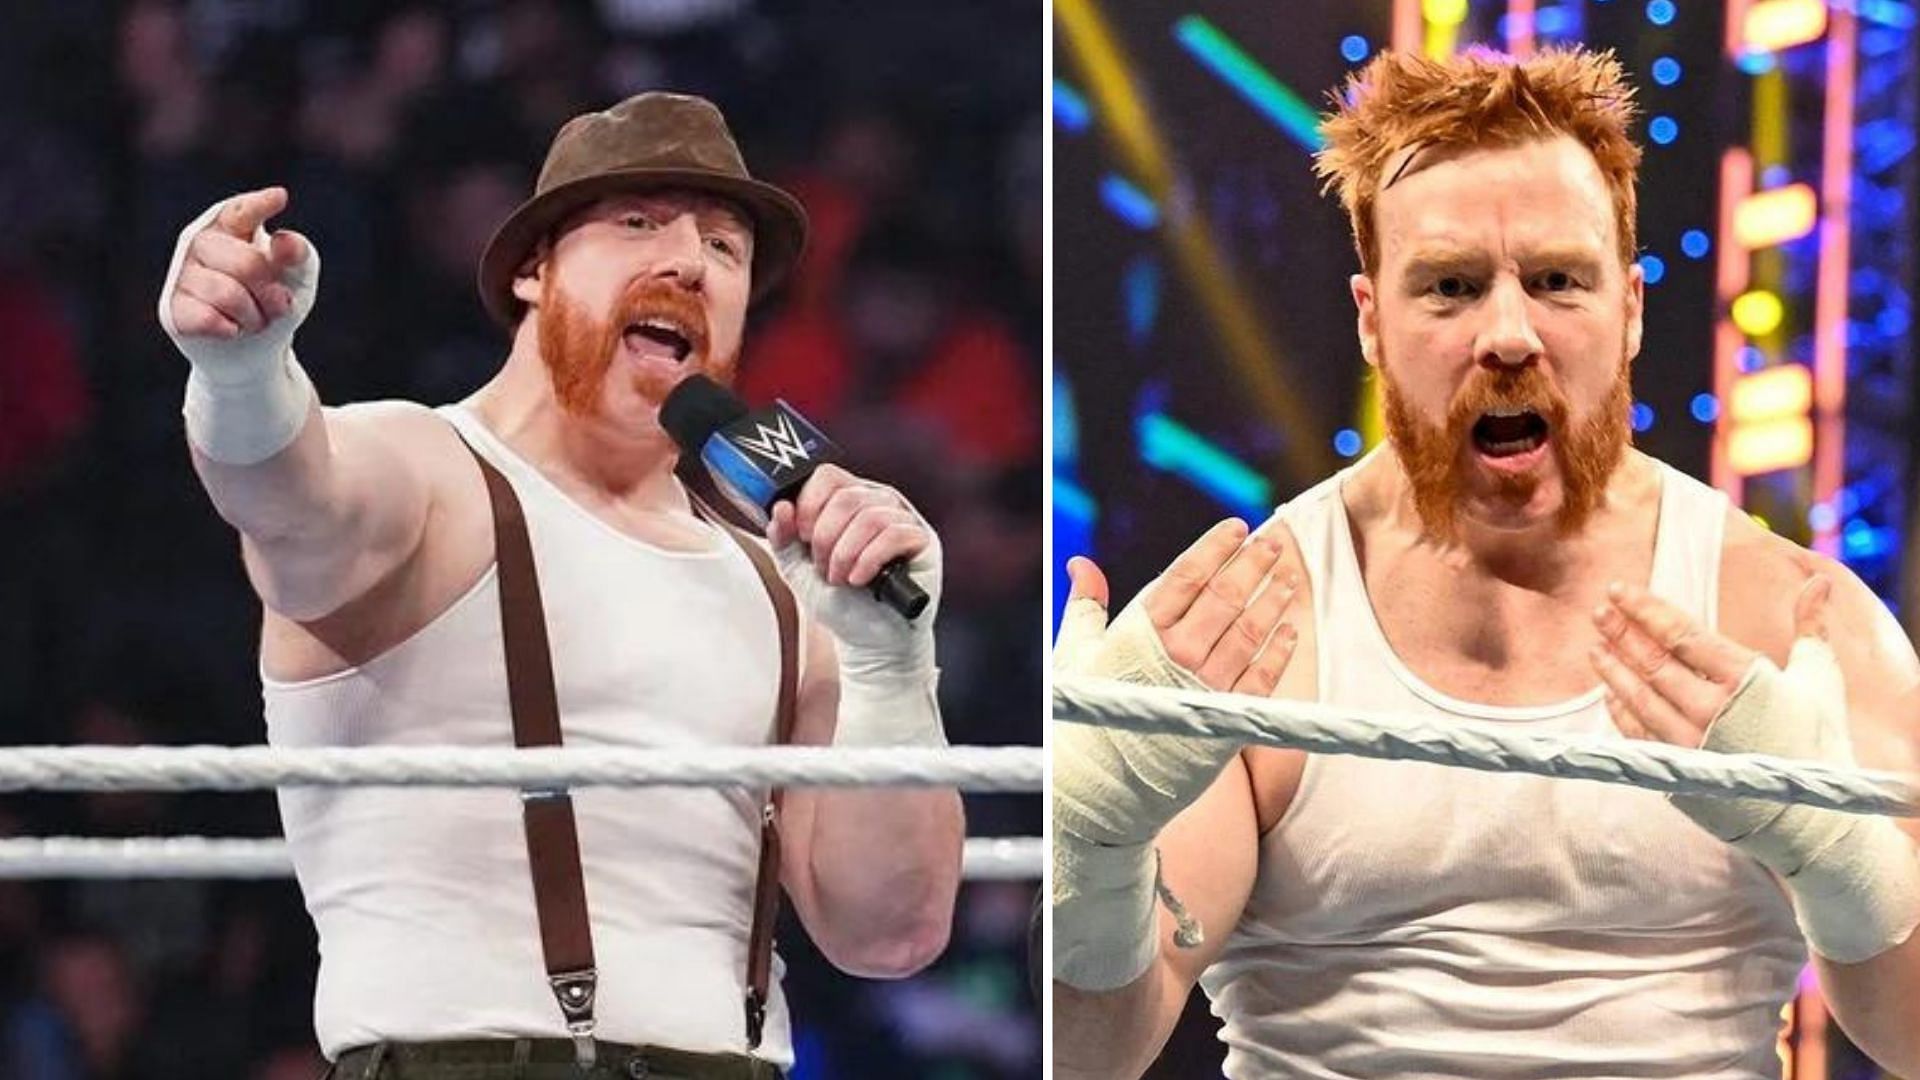 WWE SmackDown star Sheamus is the leader of the Brawling Brutes